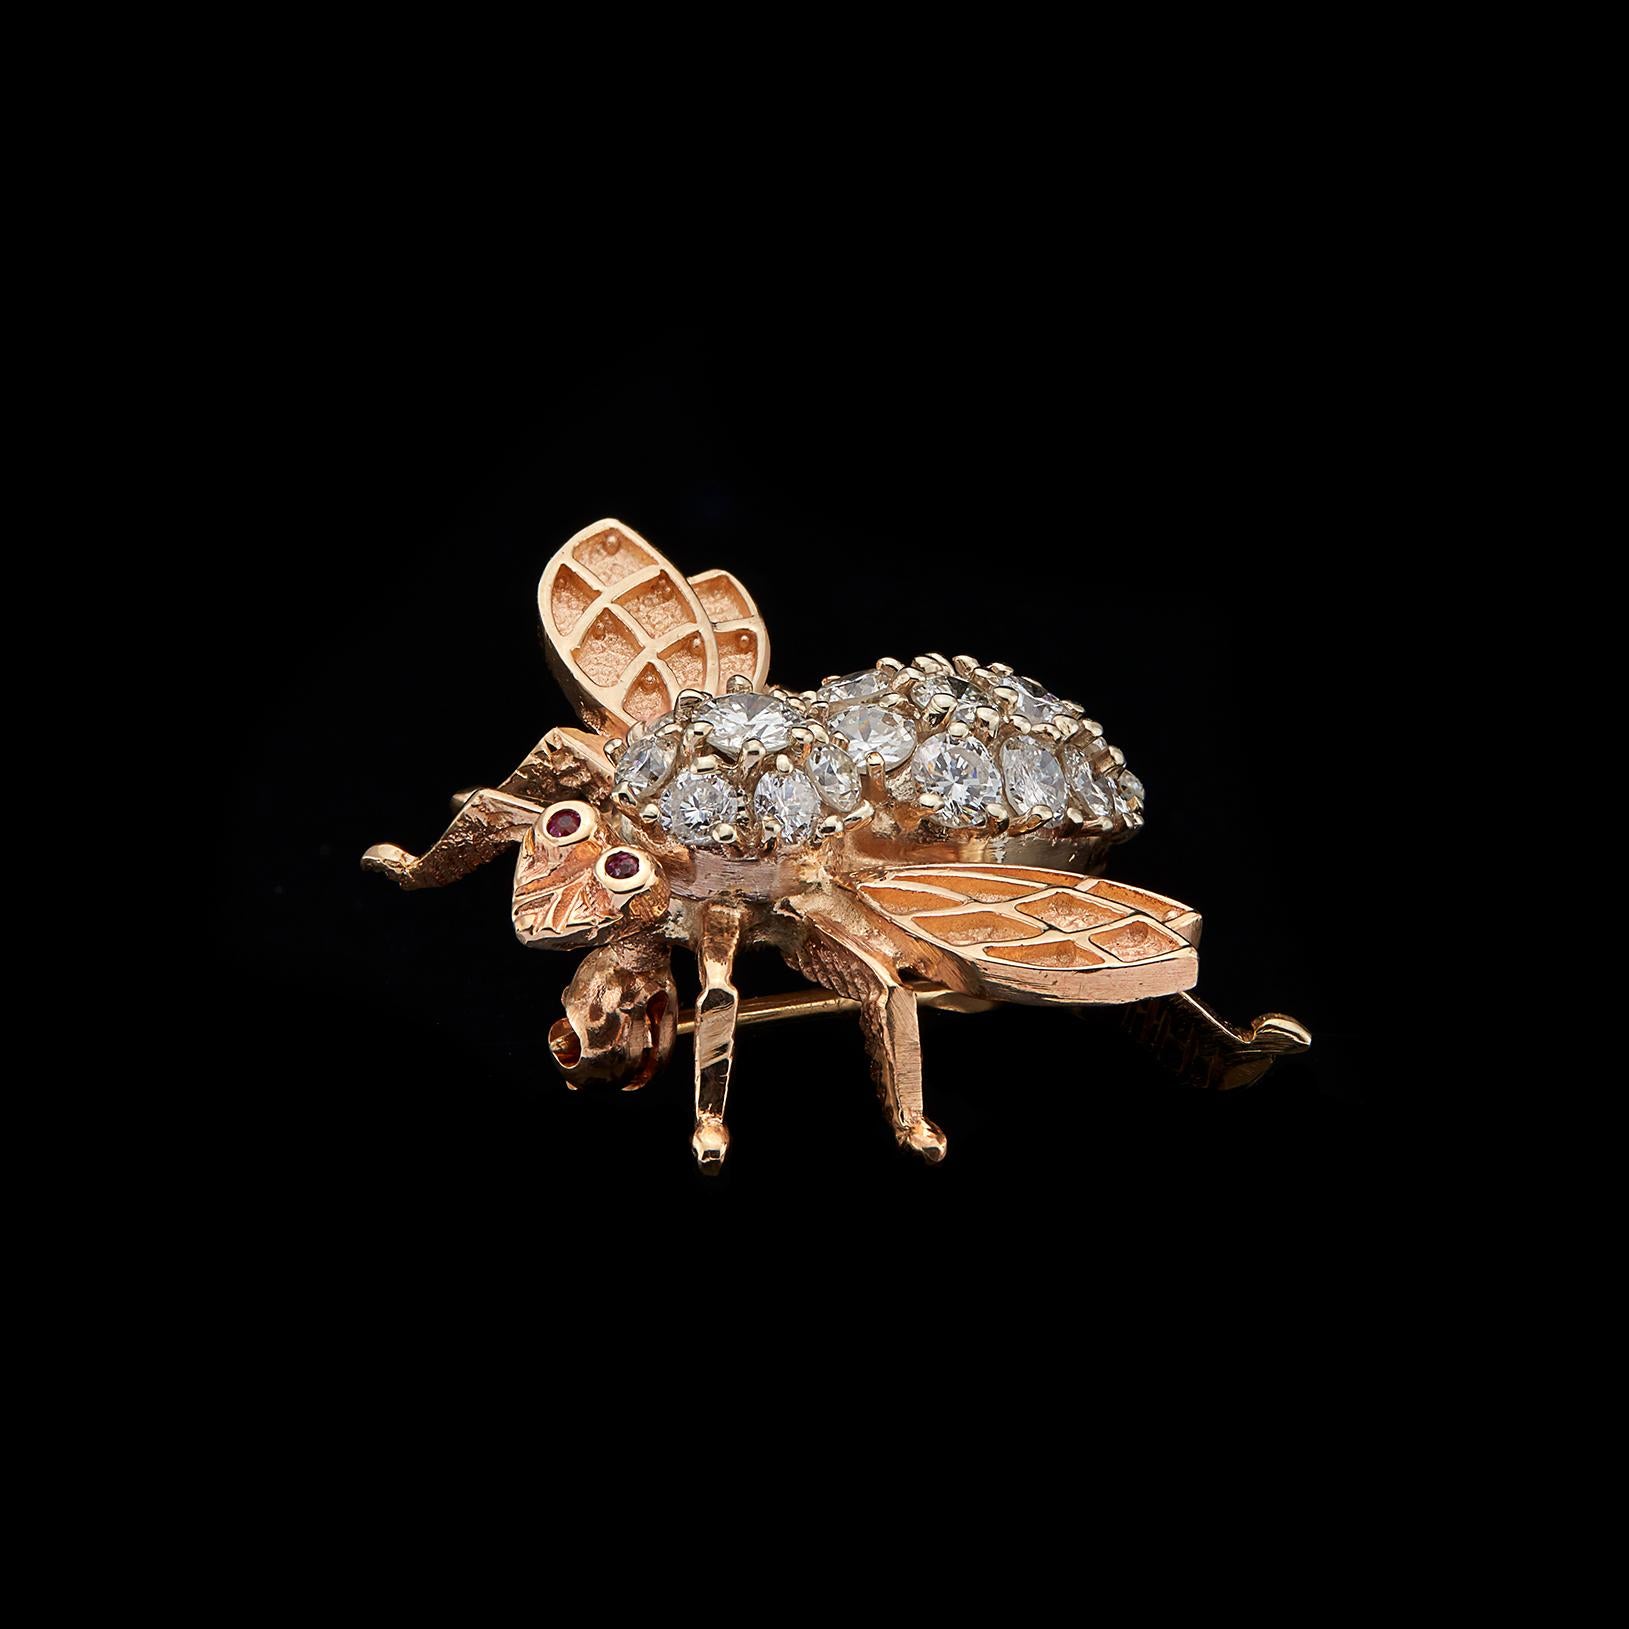 Be charmed with this diamond and 14k gold bee brooch! The body is set with 20 round brilliant-cut diamonds totaling approximately 1.11-cts (G-H-I/SI), with ruby eyes and textured wings. The bee weighs 5.6 grams and measures 1 1/8 x 7/8in. Add a